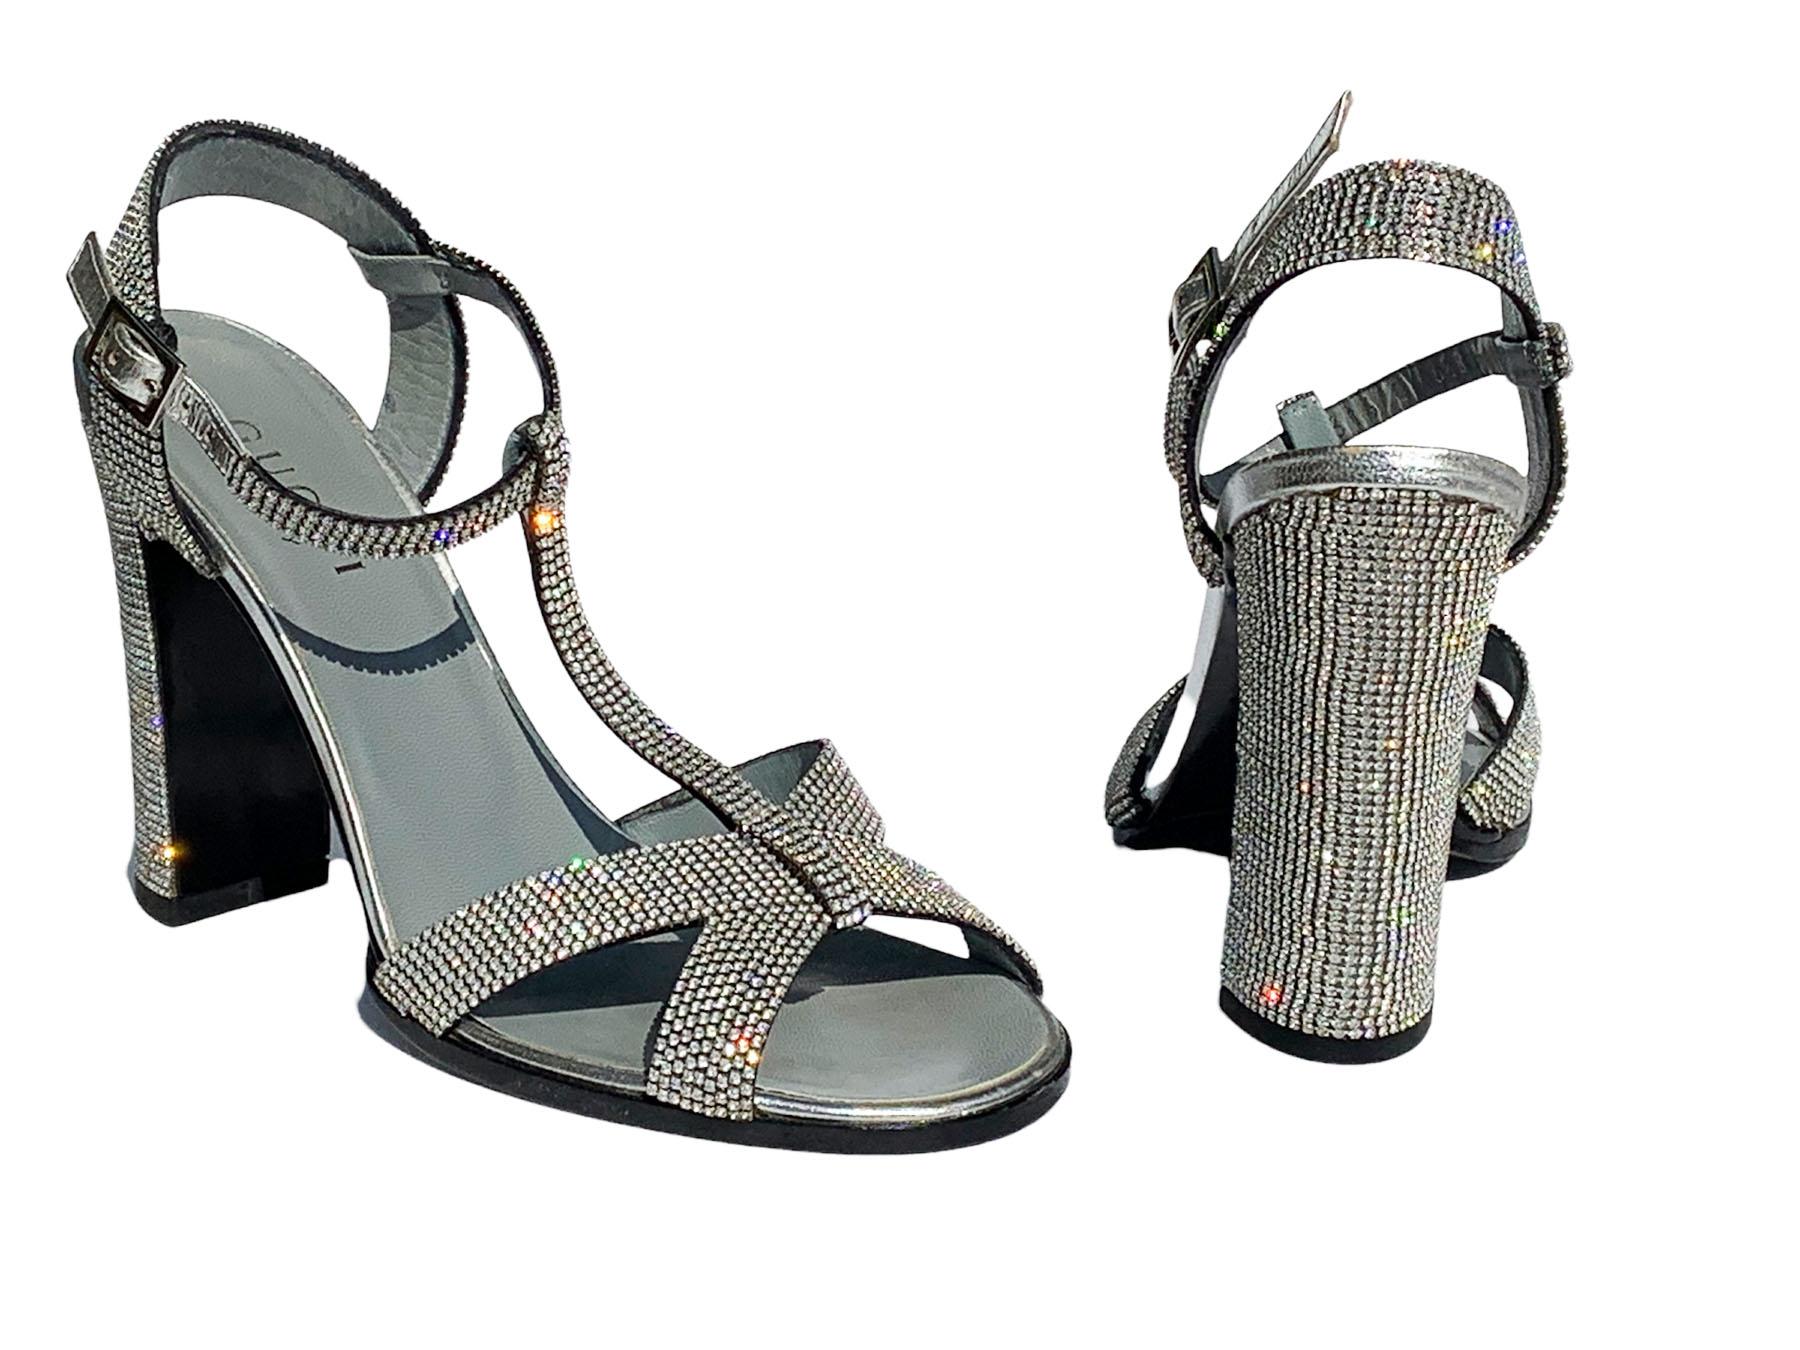 Vintage Tom Ford for Gucci Crystal Embellished Shoes Sandals
S/S 2000 Collection
USA size 6.5 ( Italian 36.5)
T-strap leather sandals fully embellished with silver tone sparkle crystals, buckle closure at ankle straps, leather sole, heel height -